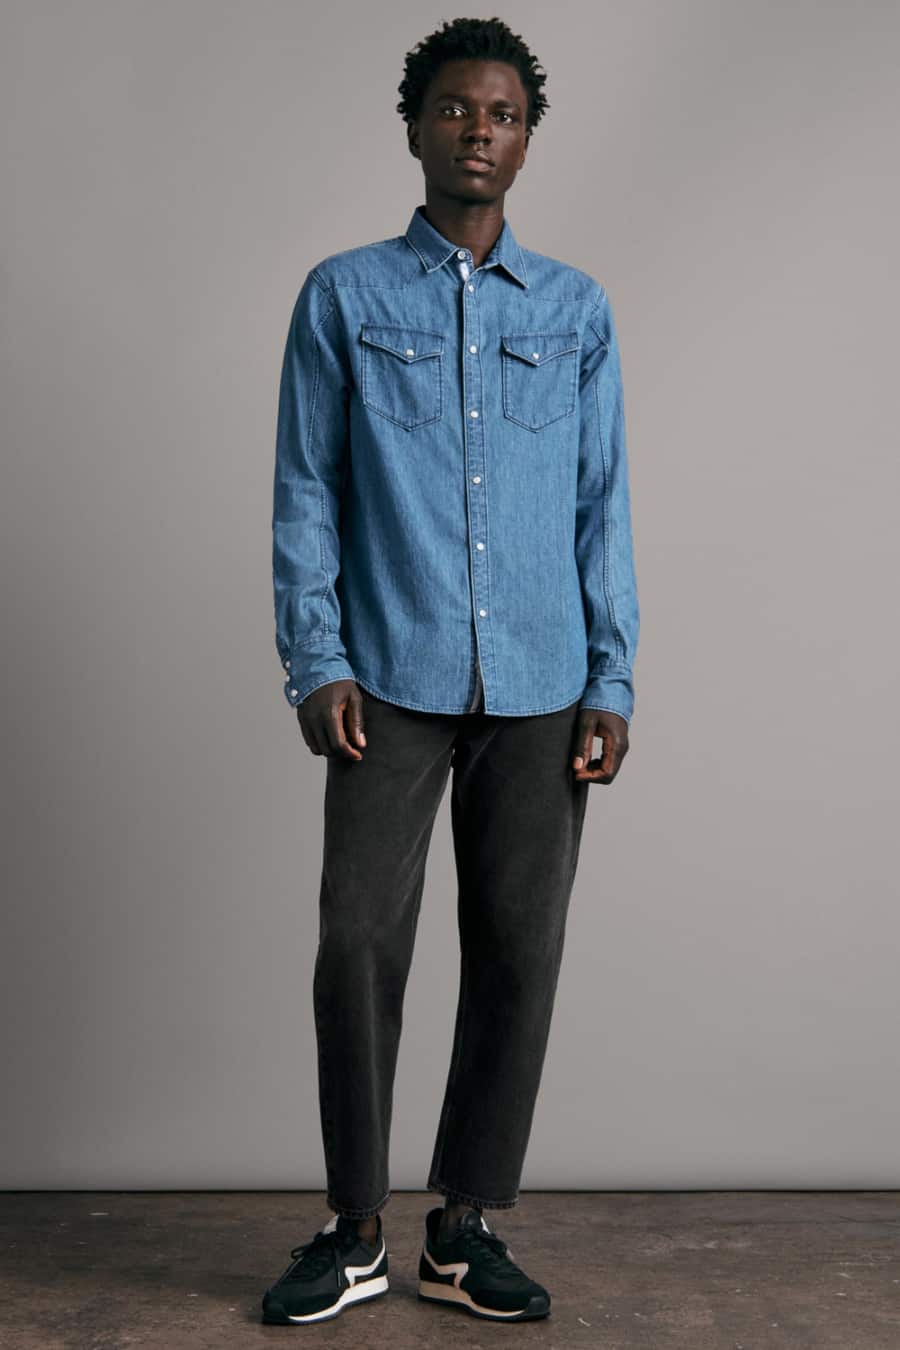 Men's black jeans, mid-blue denim western shirt and retro running shoes outfit